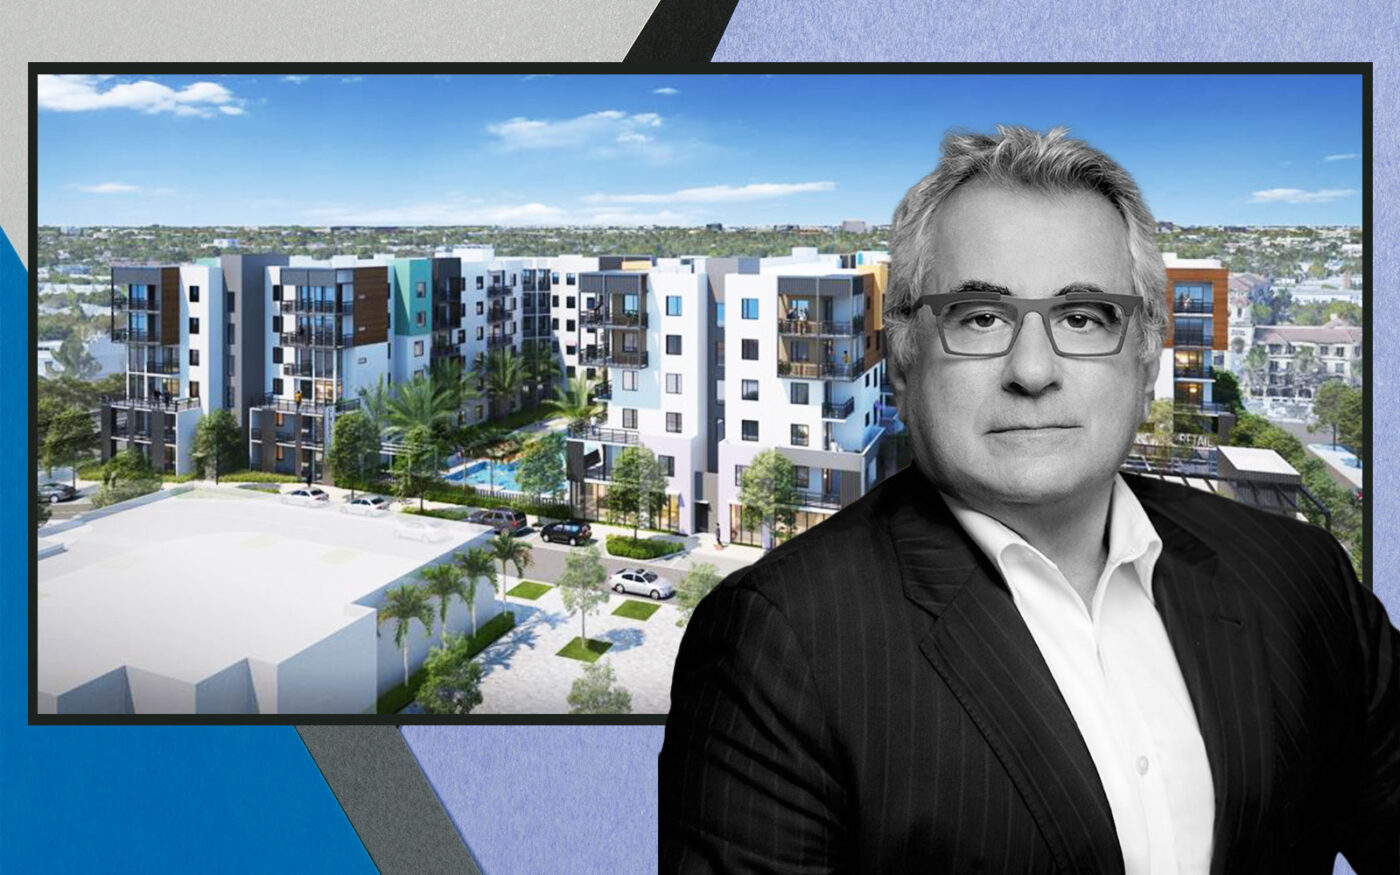 Kaplan Residential has secured approval for its inaugural major project in South Florida – a six-story mixed-use development known as Generation at Wilton Manors